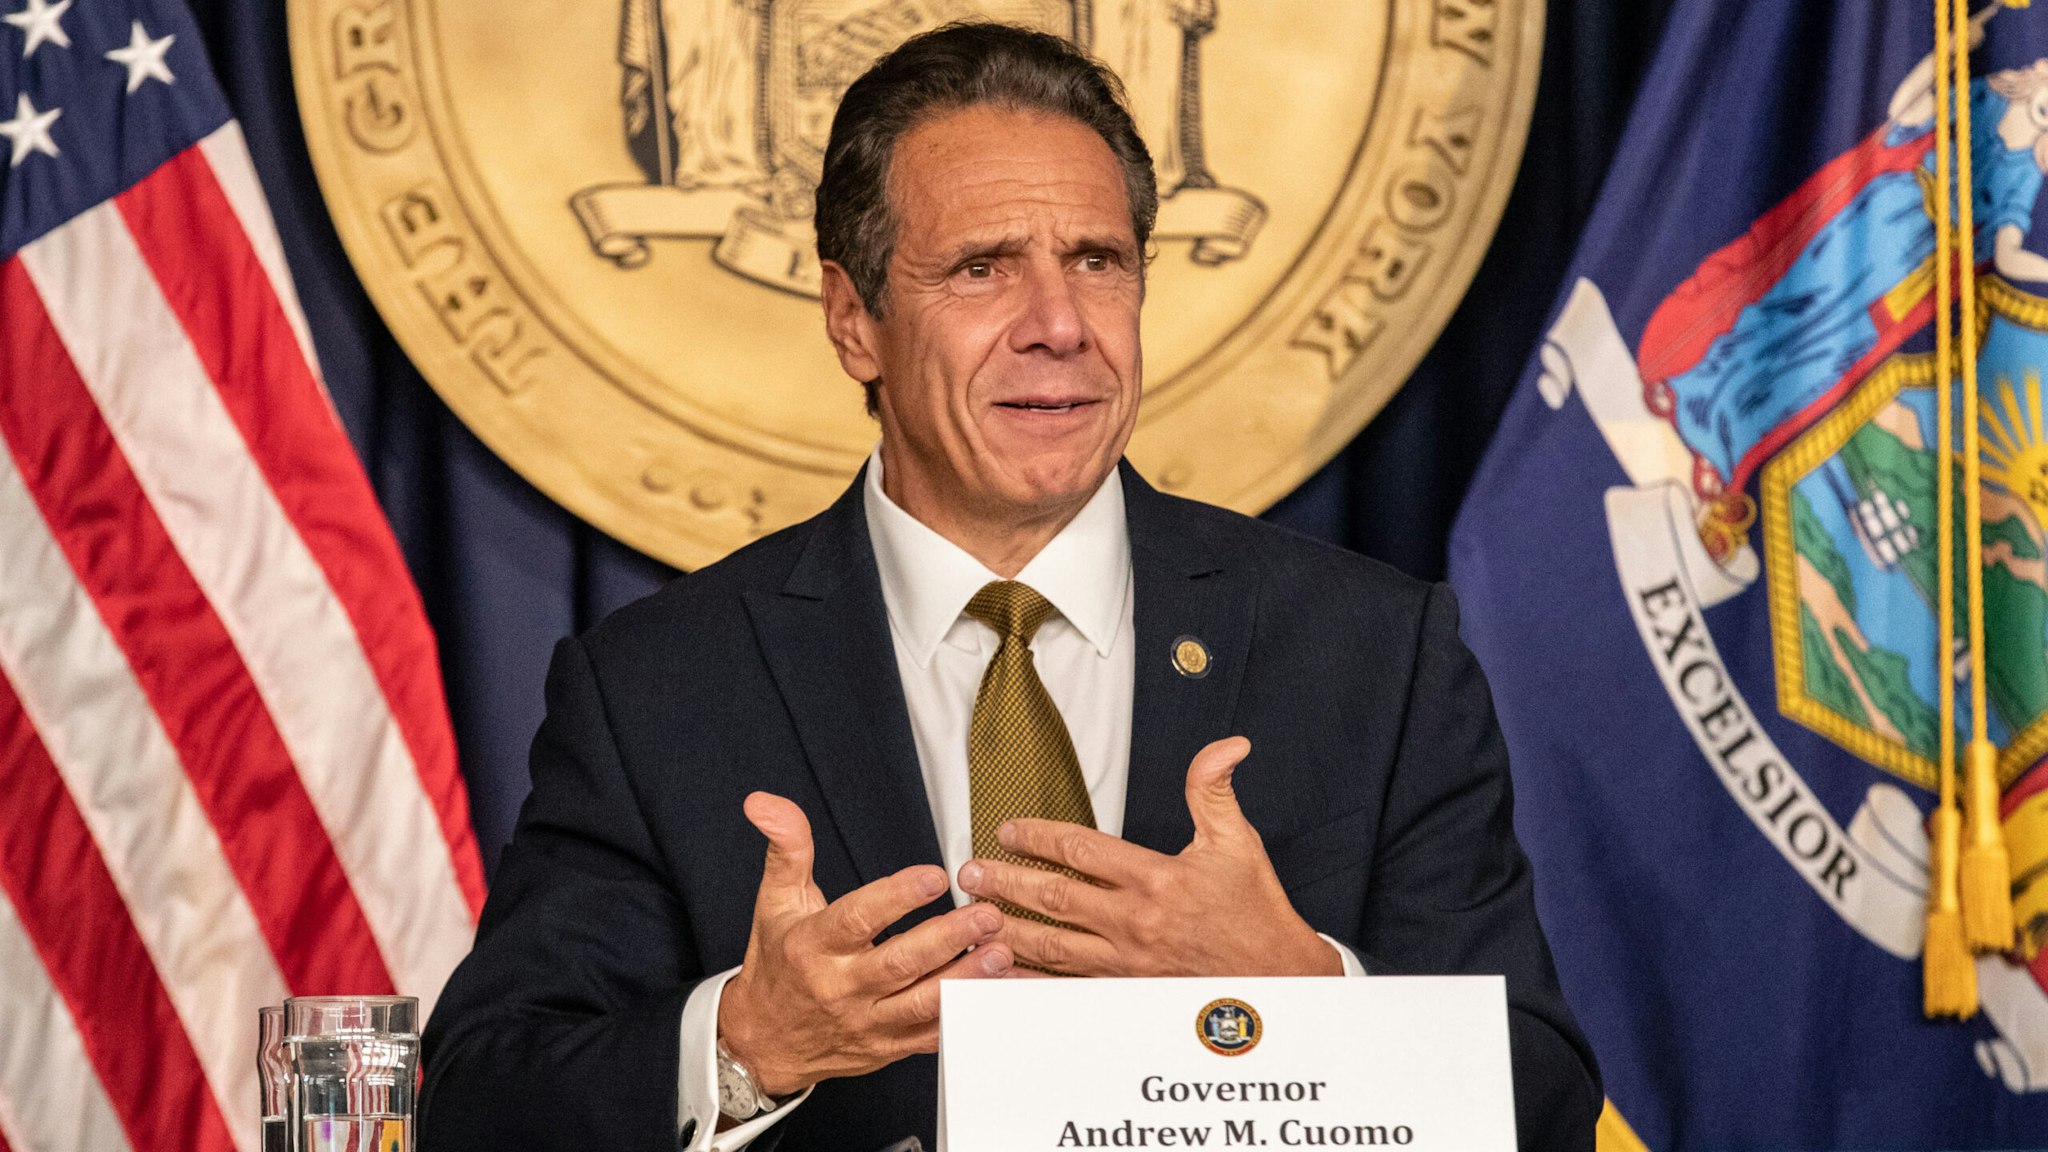 Andrew Cuomo, governor of New York, speaks during a news conference in New York, U.S., on Monday, Oct. 5, 2020. Governor Cuomo said New York City public and private schools in viral hot spots must close Tuesday, and he threatened to shut religious institutions if members dont follow rules about masks and social distancing.